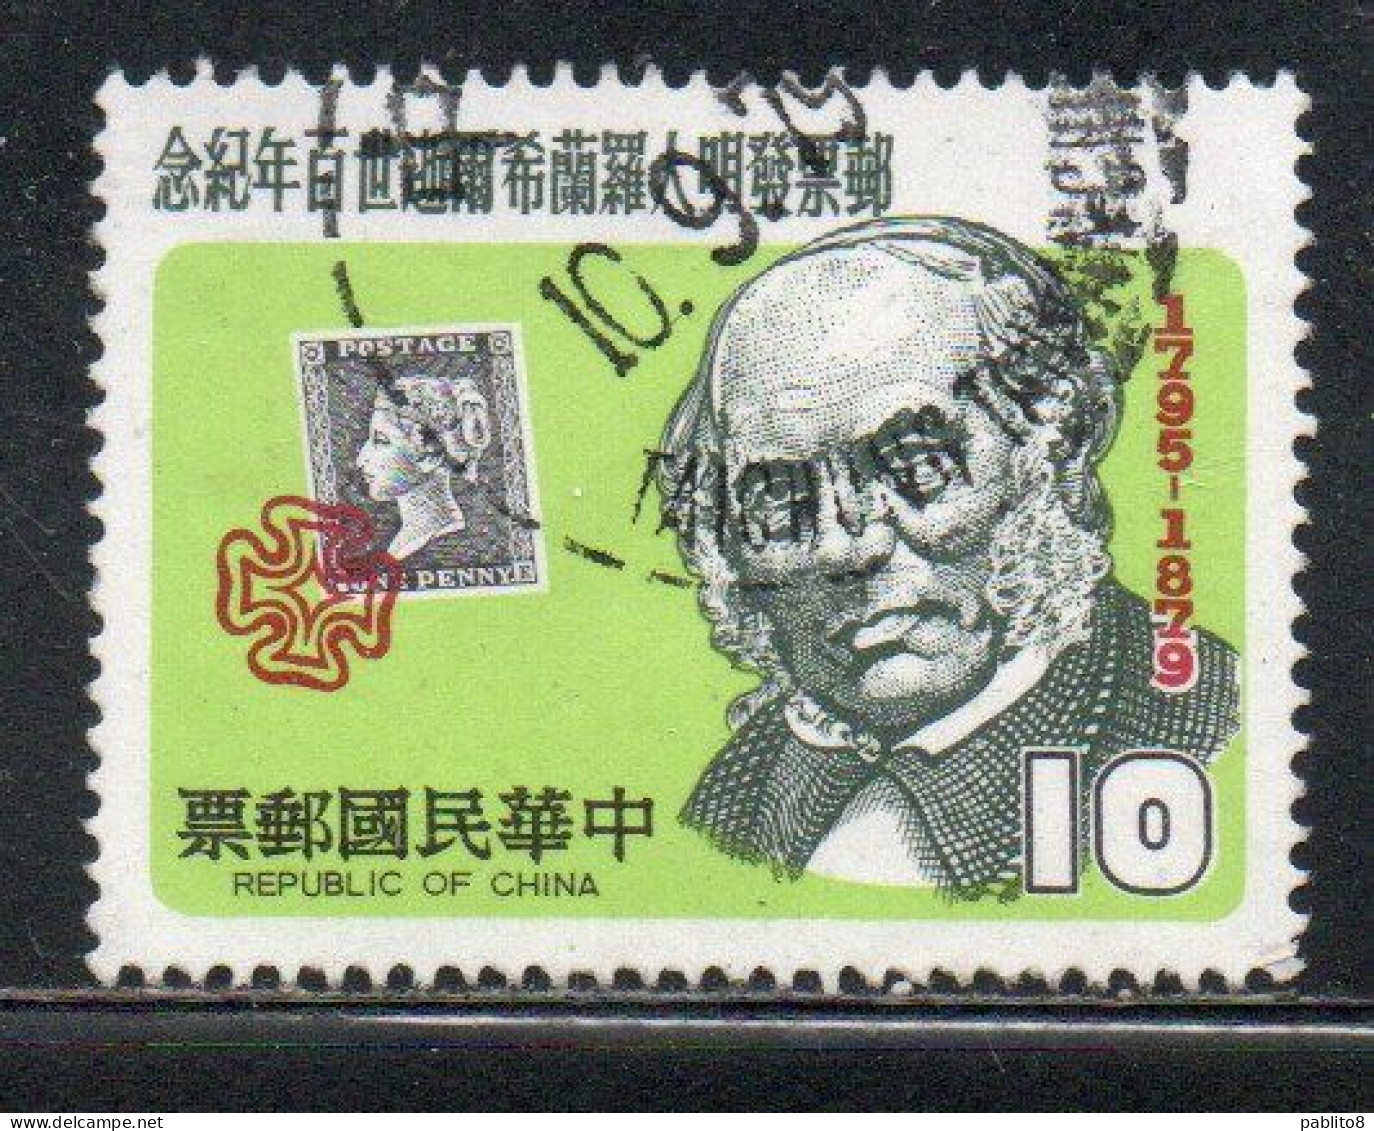 CHINA REPUBLIC CINA TAIWAN FORMOSA 1979 SIR ROWLAND HILL PENNY BLACK 10$ USED USATO OBLITERE' - Used Stamps